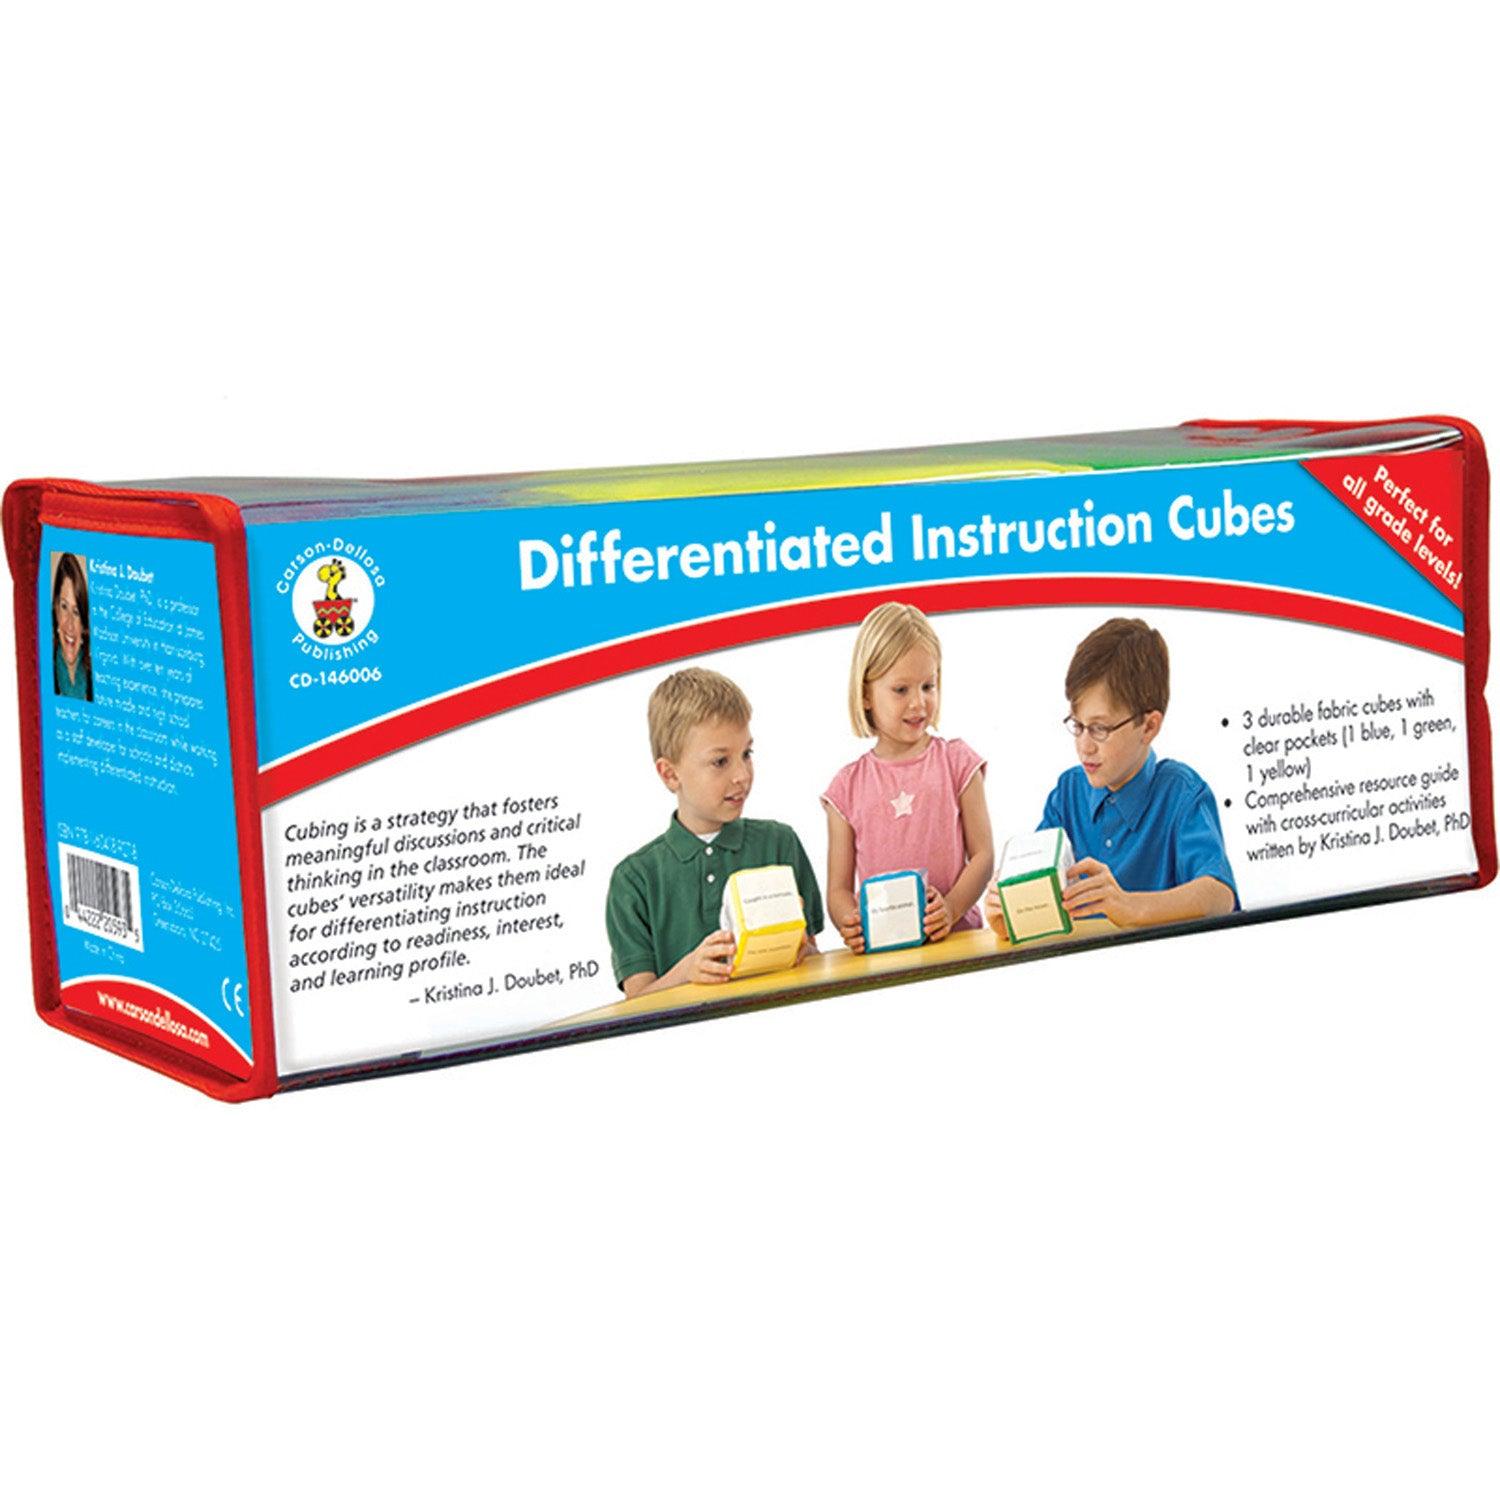 Differentiated Instruction Cubes Manipulative, Grade PK-5, Pack of 3 - Loomini